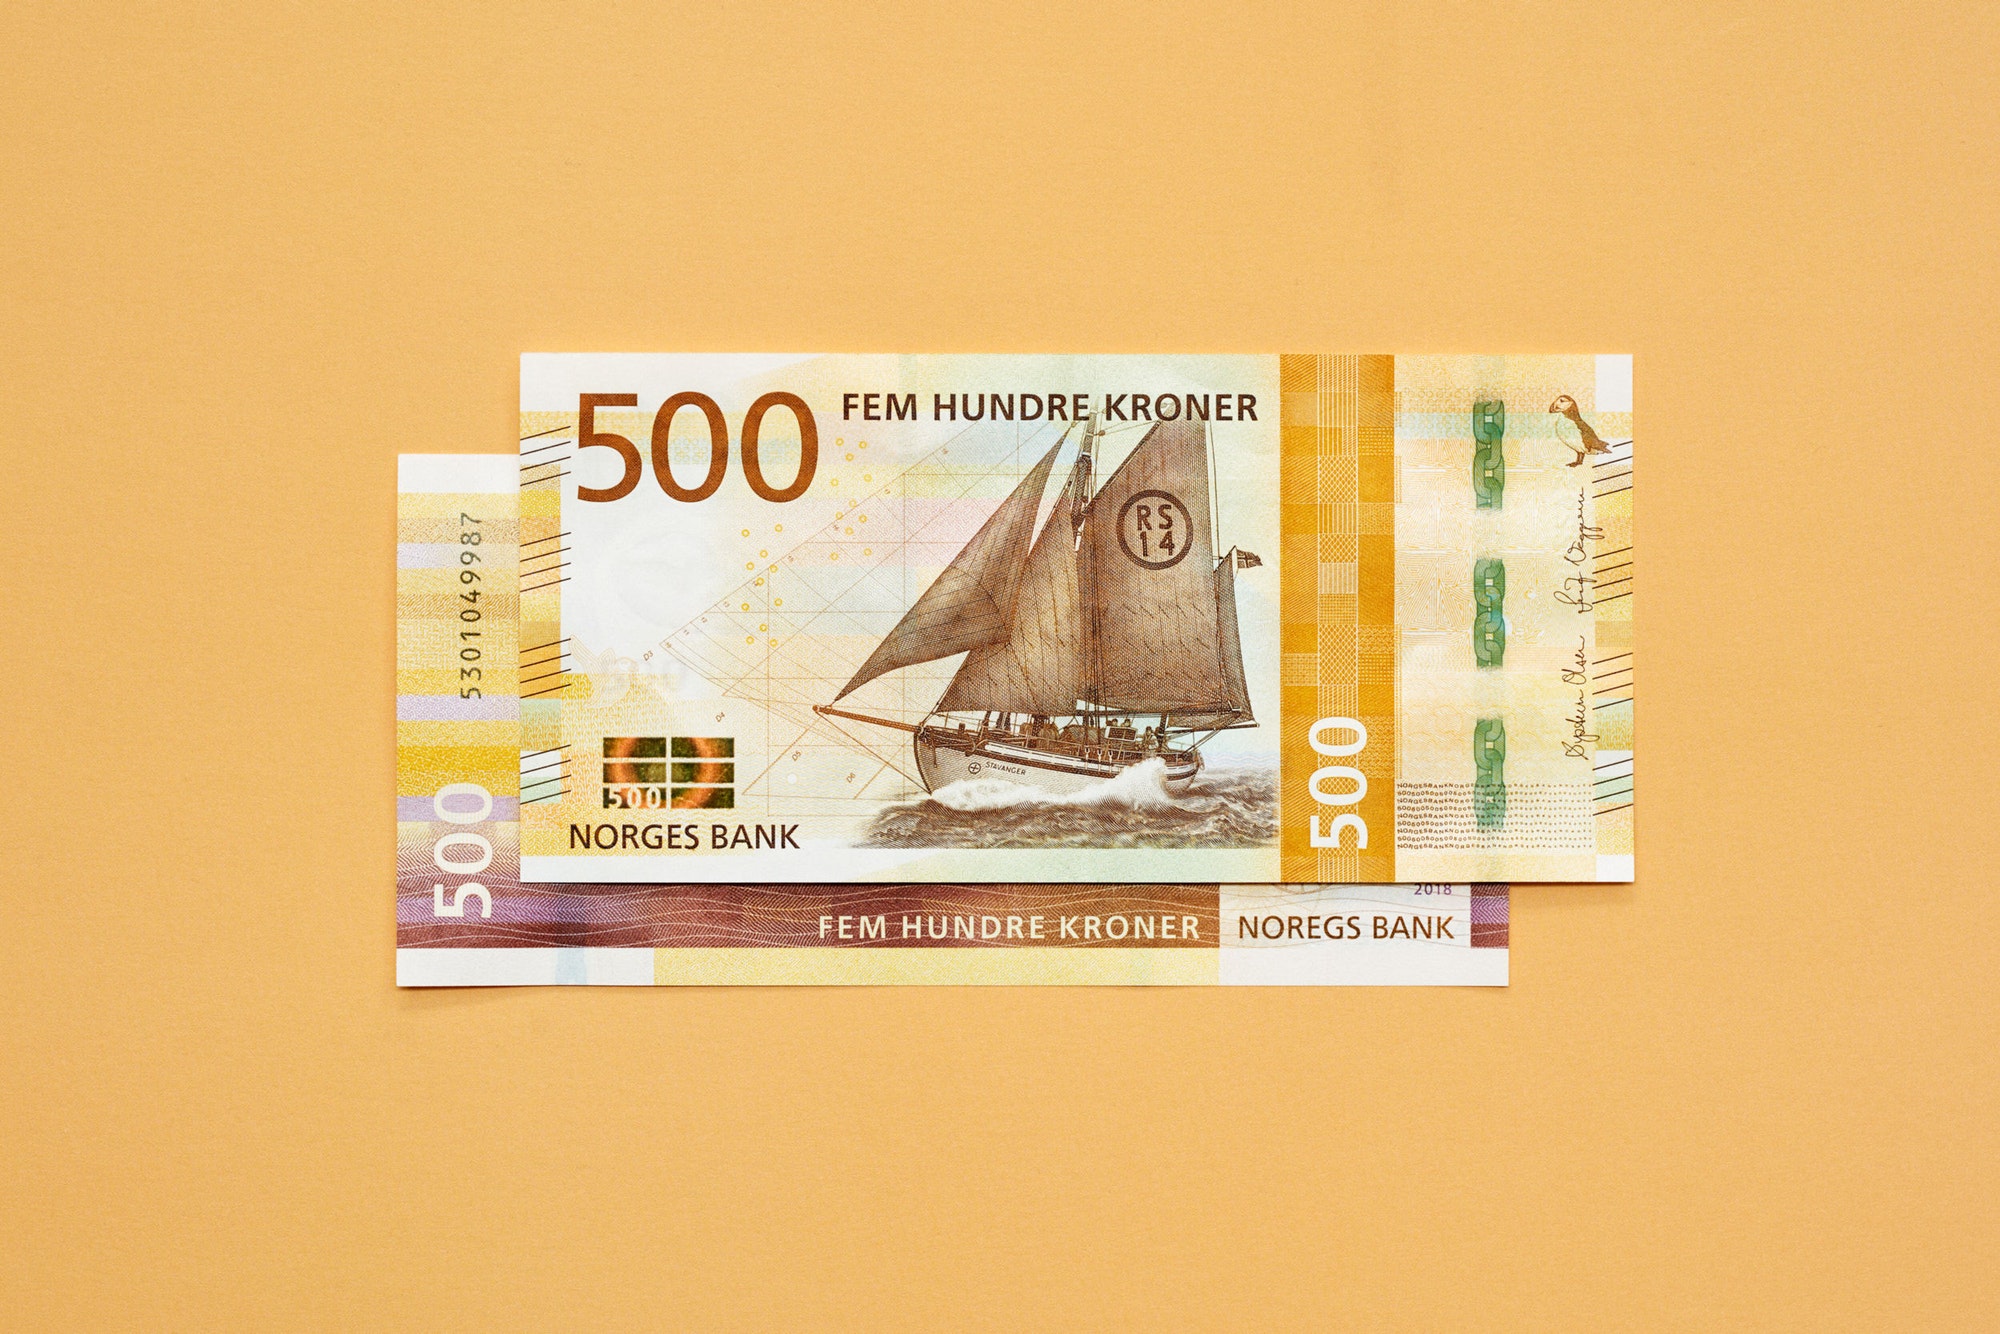 New banknotes for Norges Bank designed by The Metric System